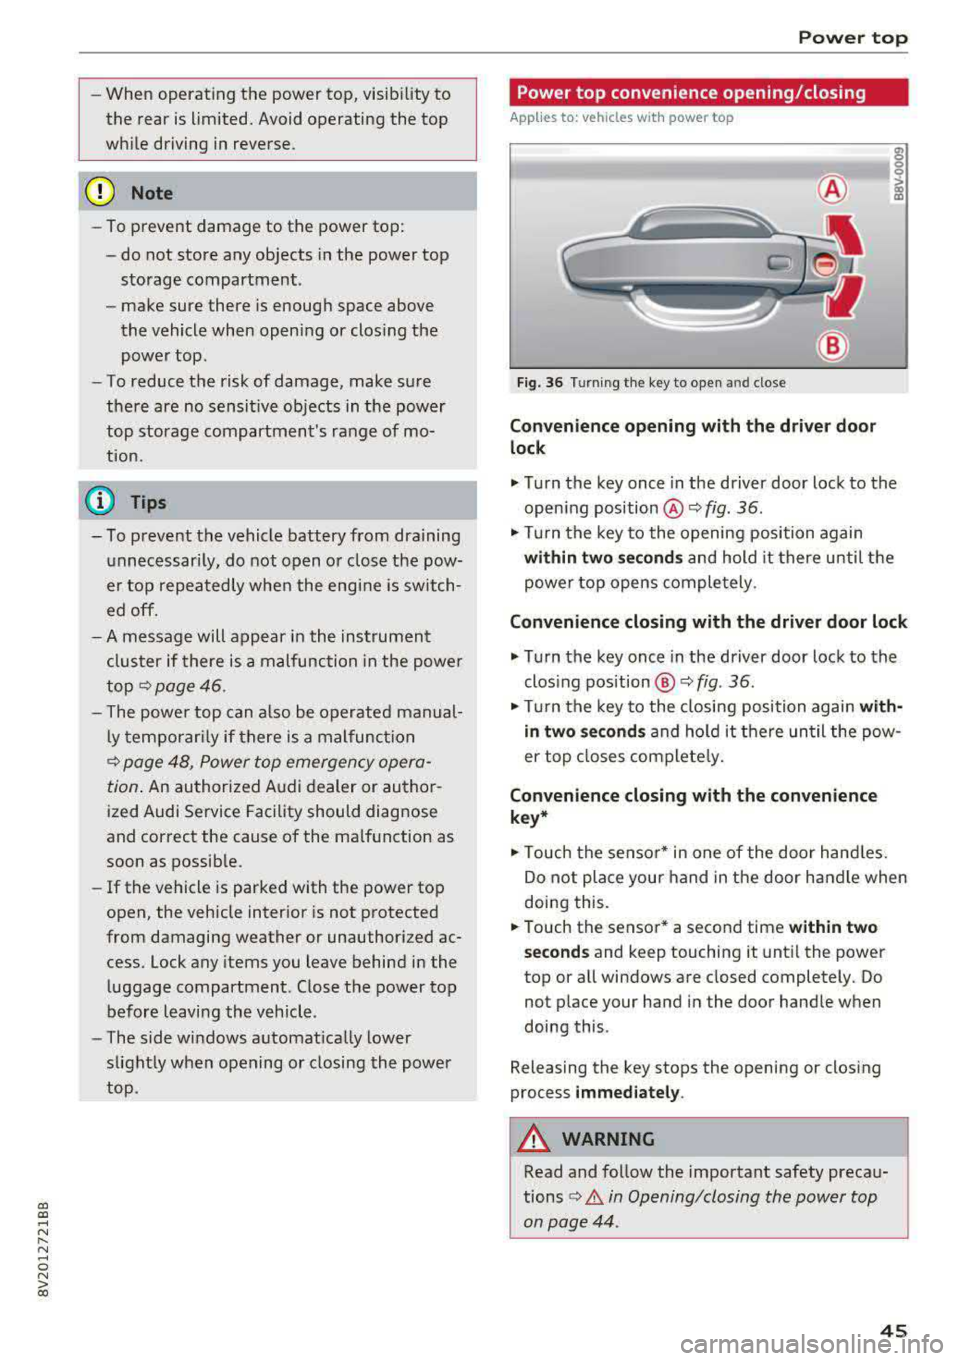 AUDI A3 SEDAN 2017 Service Manual a,  a, ..... N 
" N ..... 0 N > 00 
-When  operating  the  power  top,  visibility  to  
the  rear  is limited.  Avoid operating  the  top 
while  driving  in reverse. 
(D Note 
- To prevent  damage  